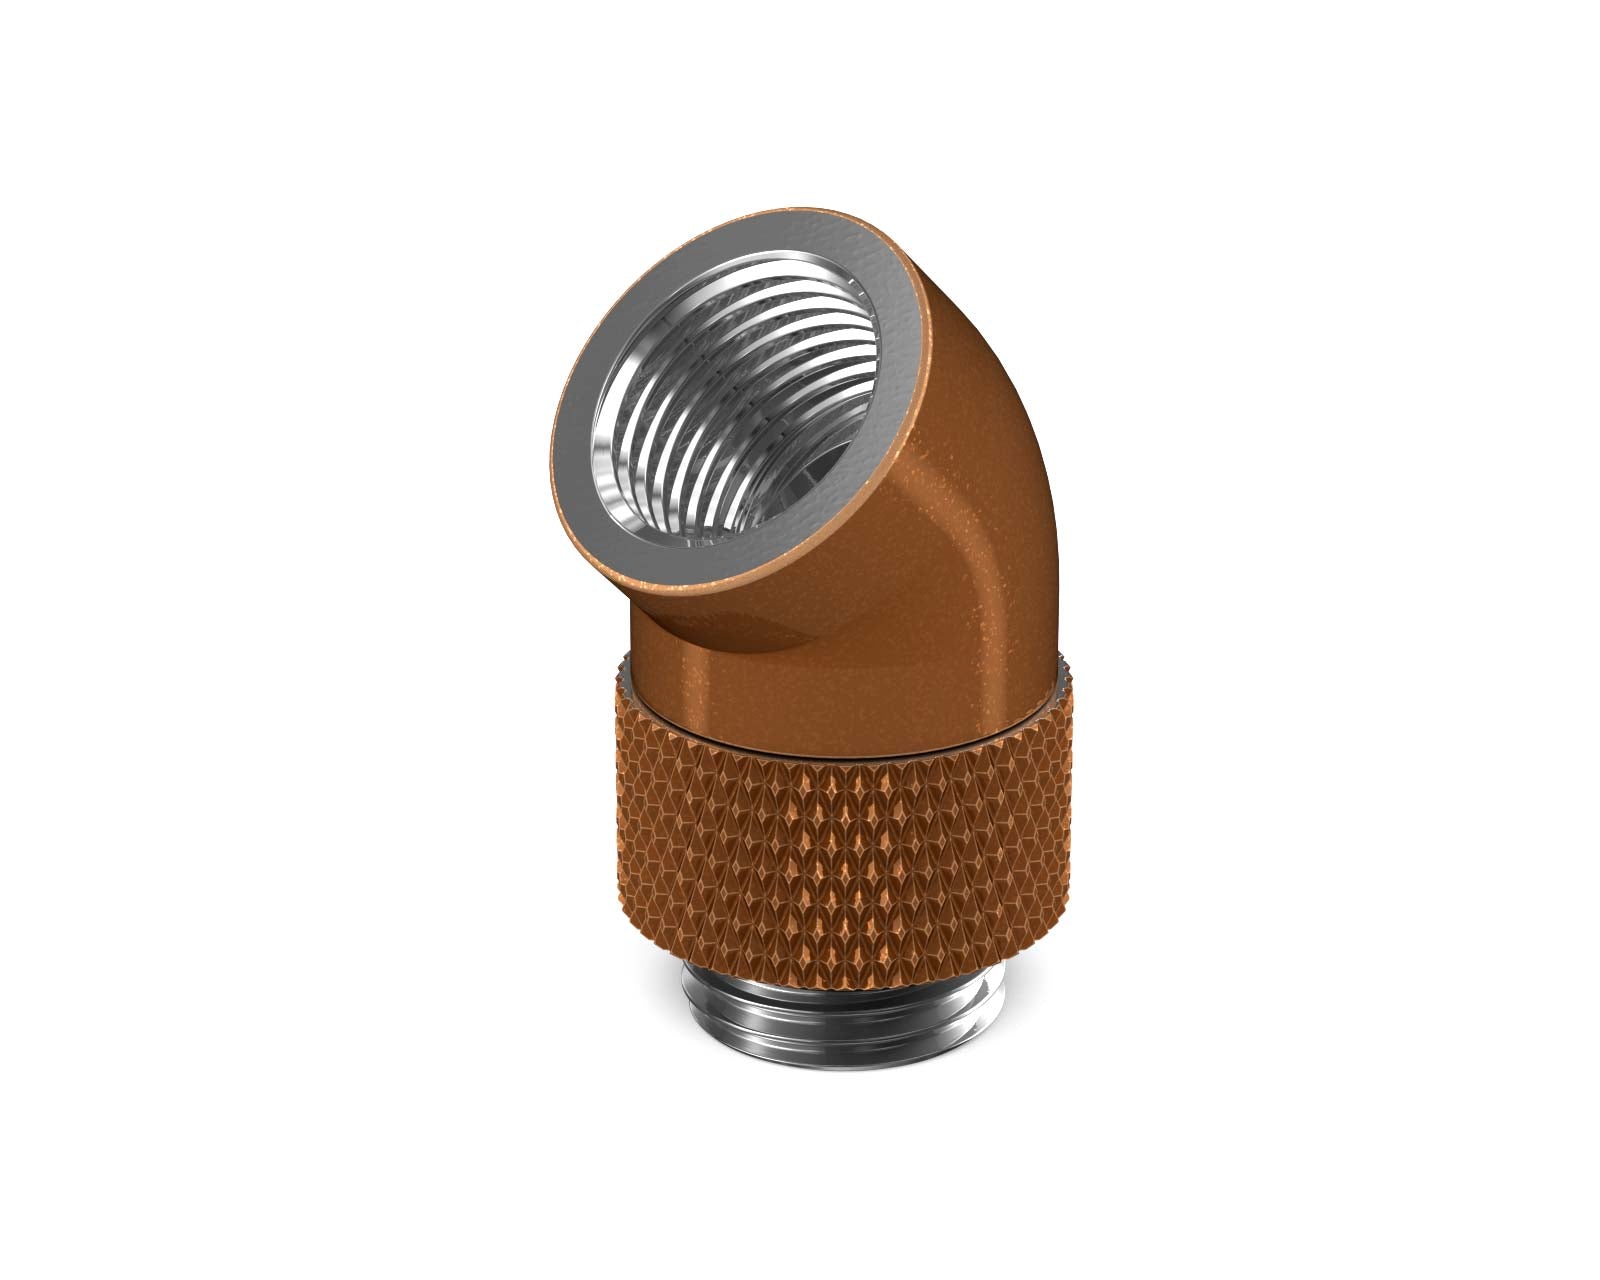 PrimoChill Male to Female G 1/4in. 45 Degree SX Rotary Elbow Fitting - PrimoChill - KEEPING IT COOL Copper